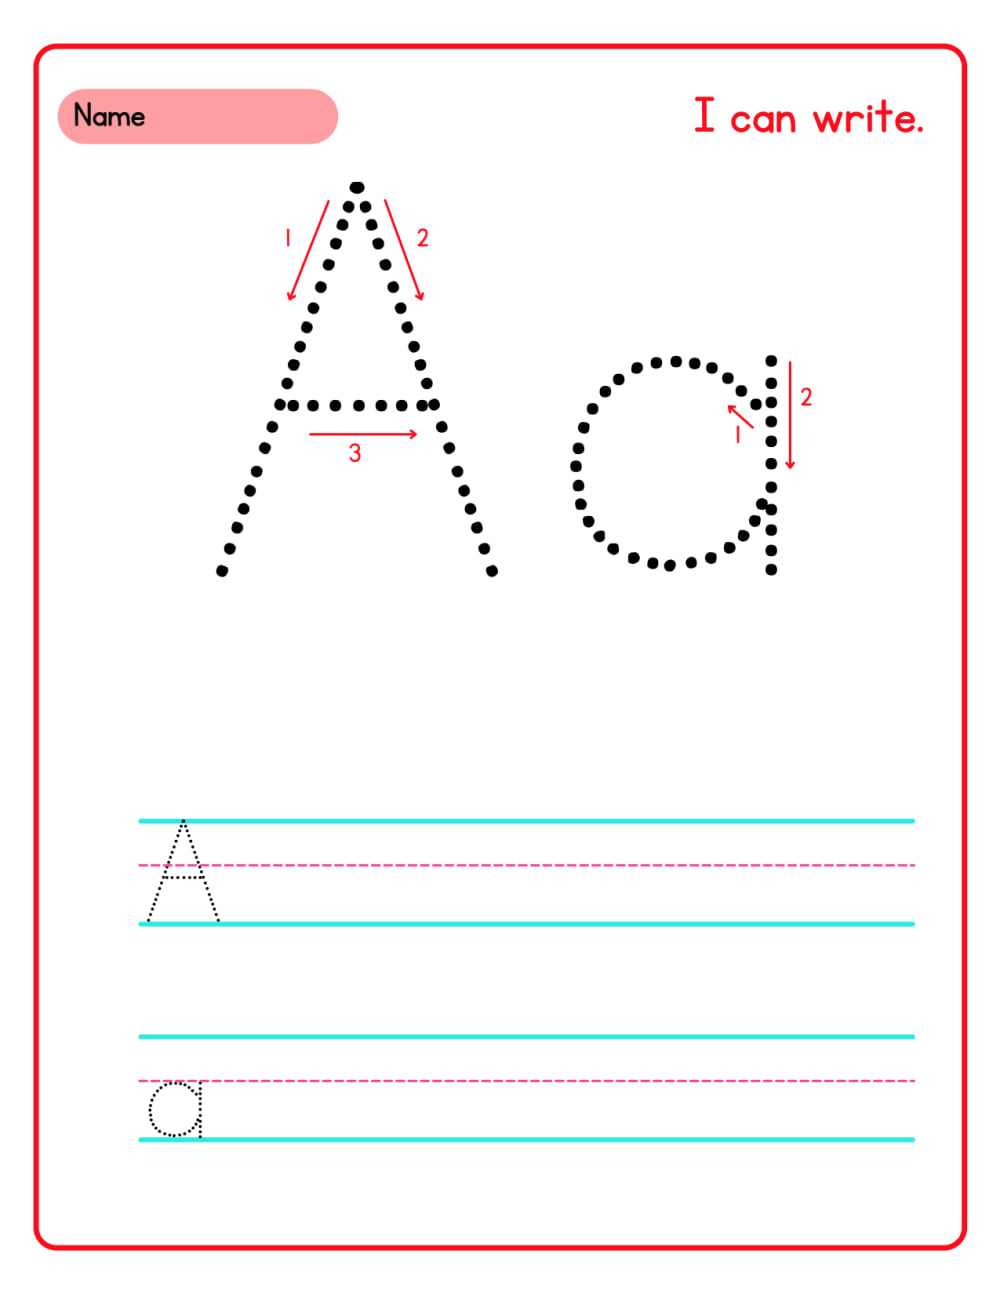 Alphabet Letters Tracing: Letter Tracing Book For Preschoolers